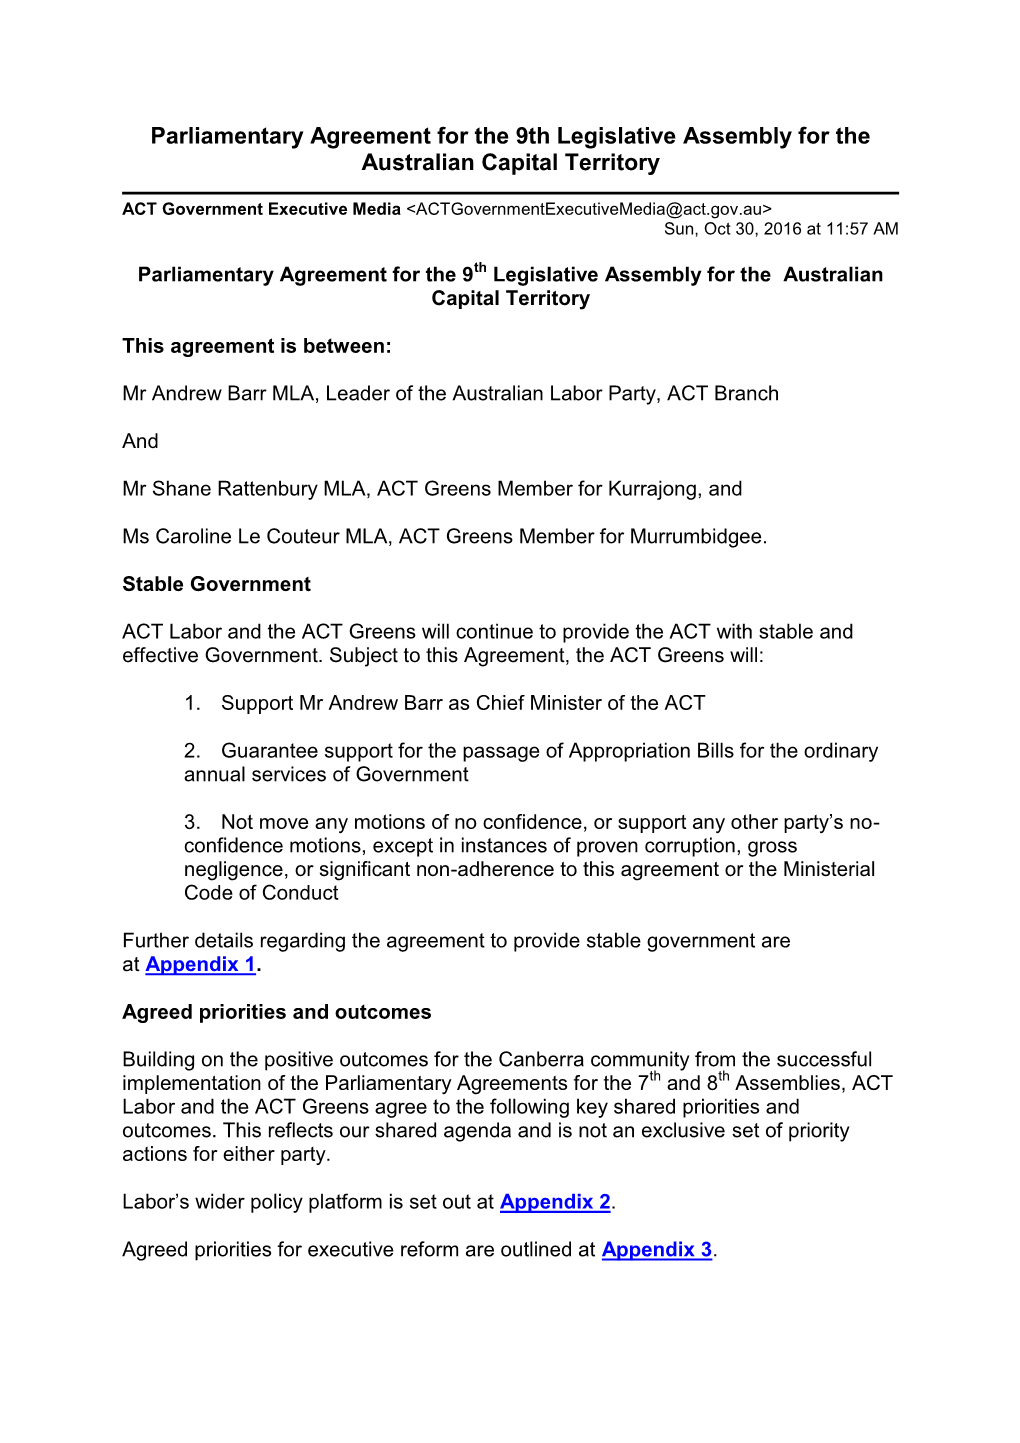 Parliamentary Agreement for the 9Th Legislative Assembly for the Australian Capital Territory